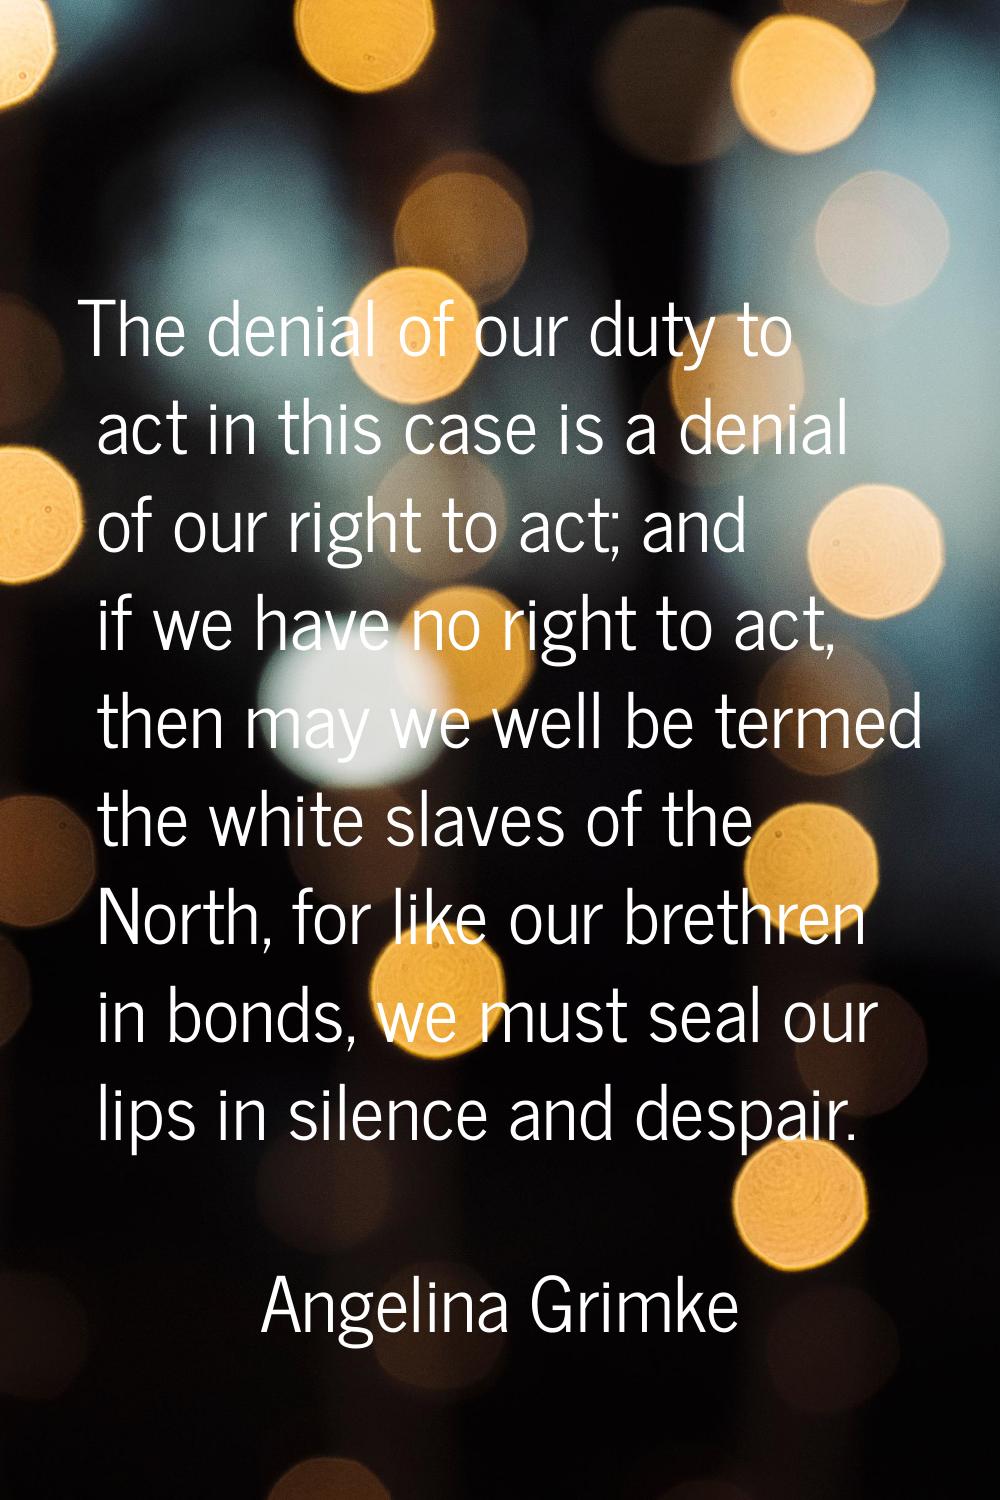 The denial of our duty to act in this case is a denial of our right to act; and if we have no right